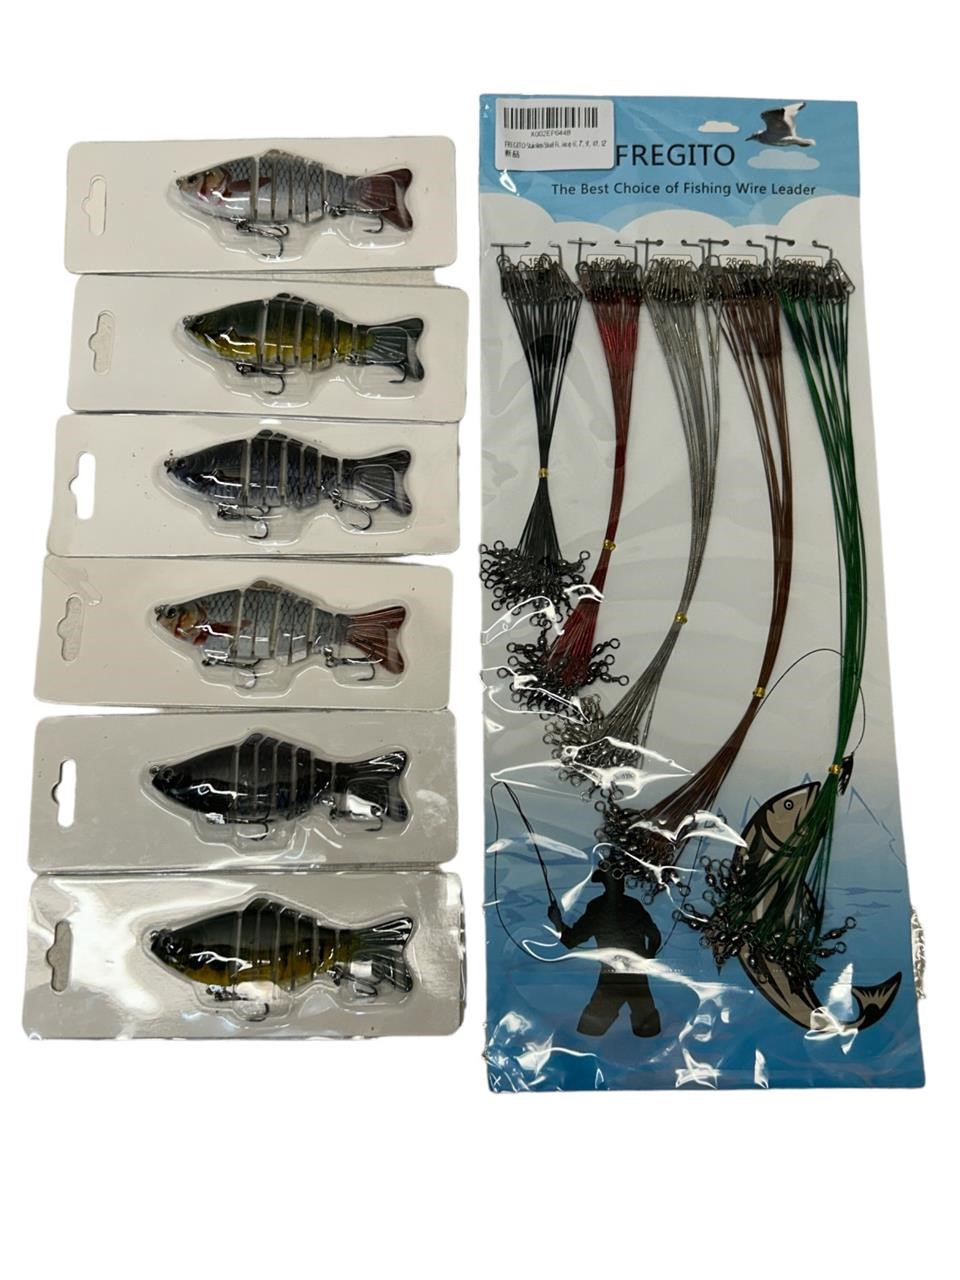 Lot of 3d Fishing Lures & Fishing Wire Leader